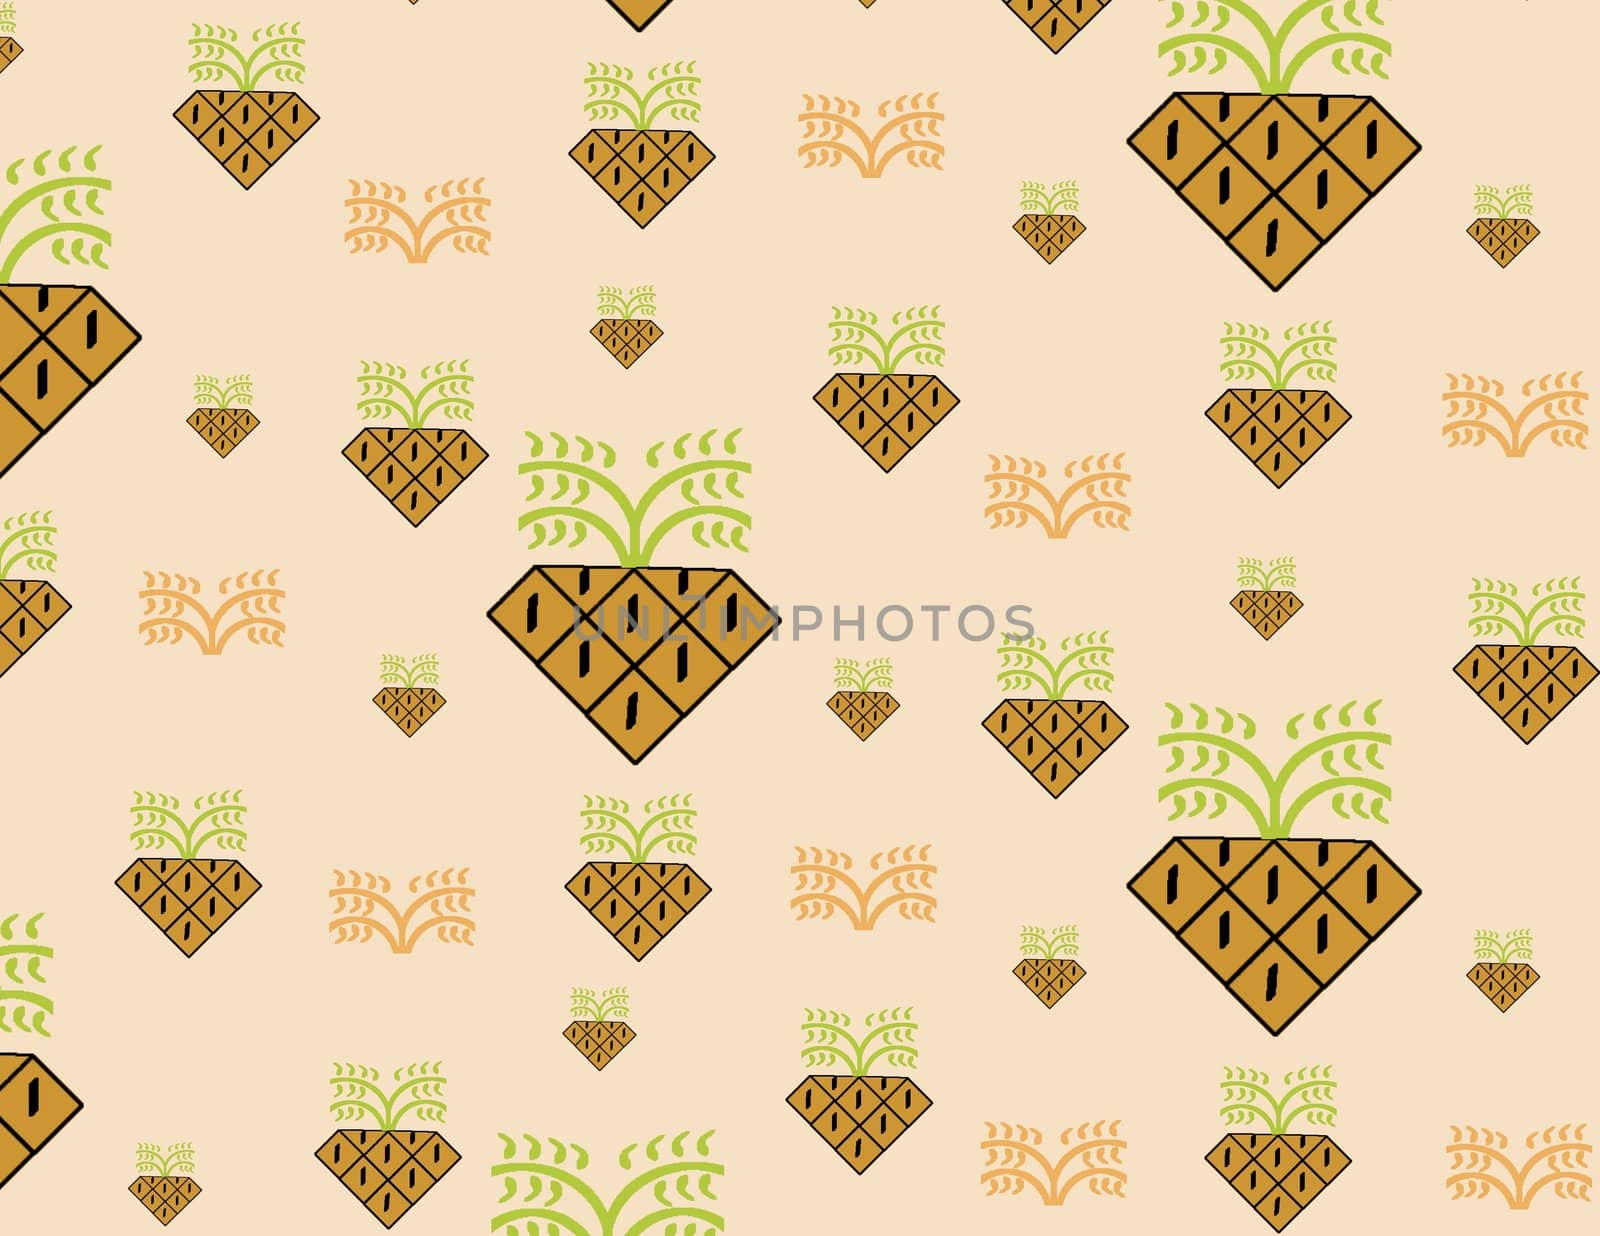 Stylized pineapples on a peach colored background giving a retro feeling - a raster illustration.